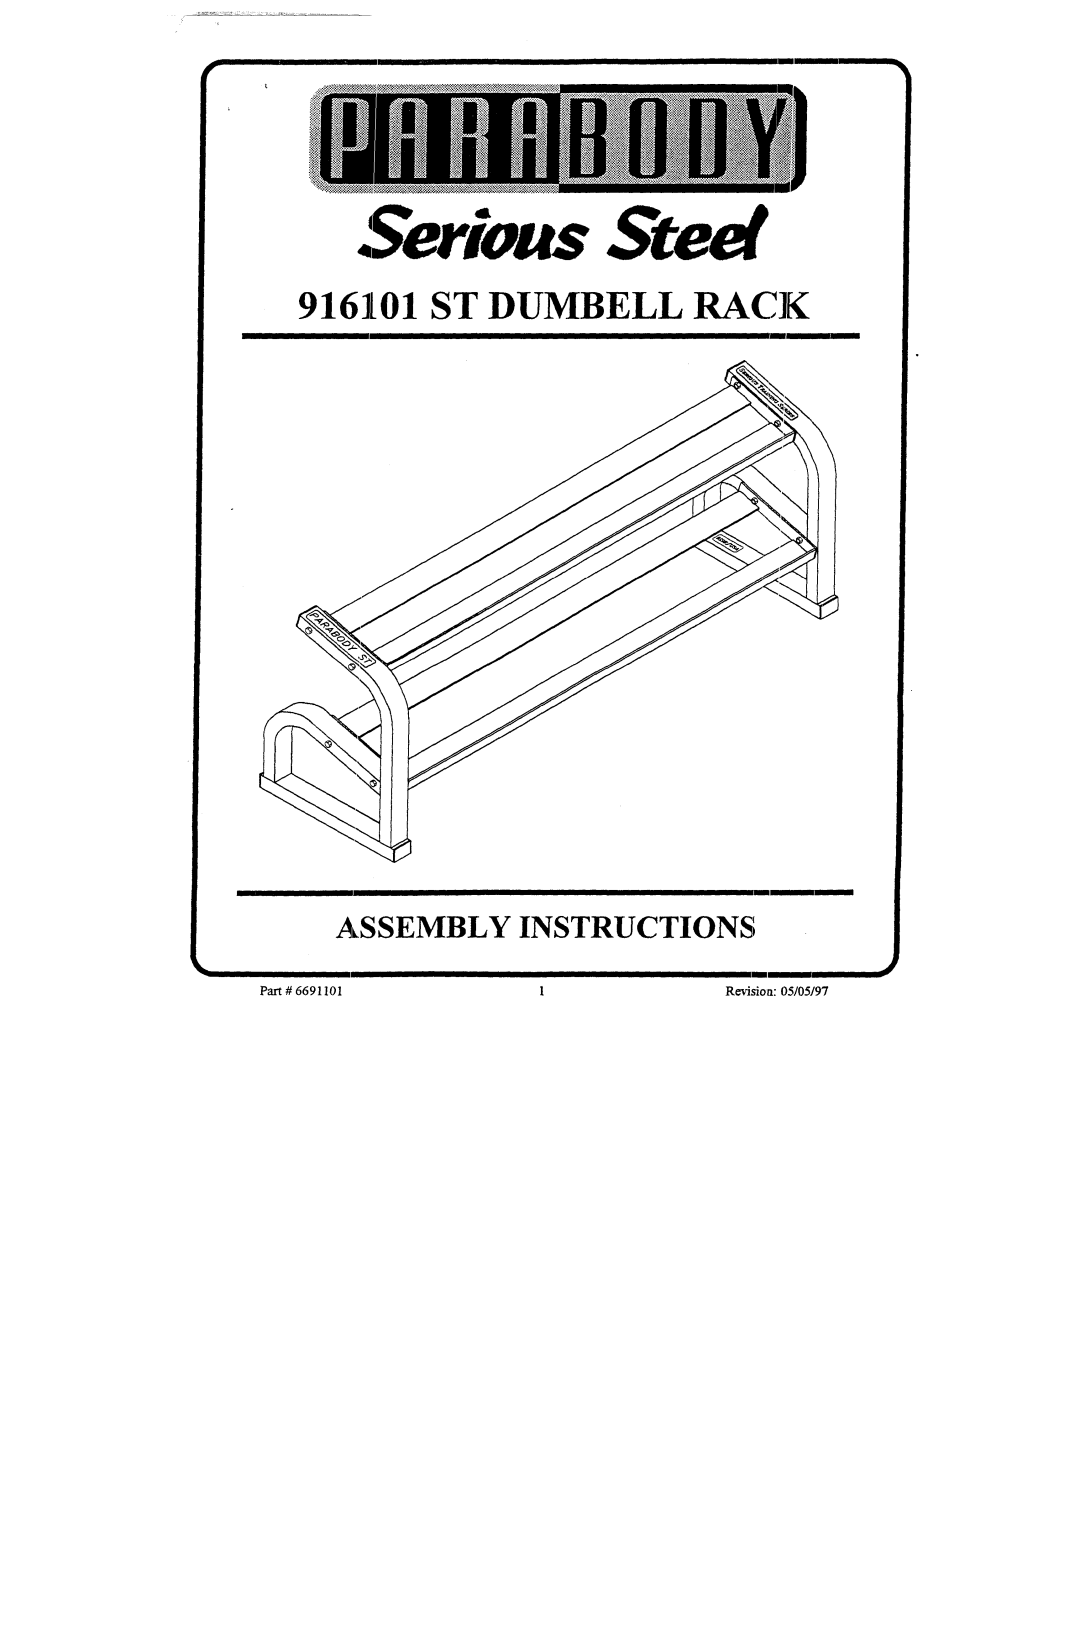 ParaBody 916101 manual ~erious Steel, St Dumbell Rack, Assembly Instructions, 6691101, Revision 05/05/97, I Ii 